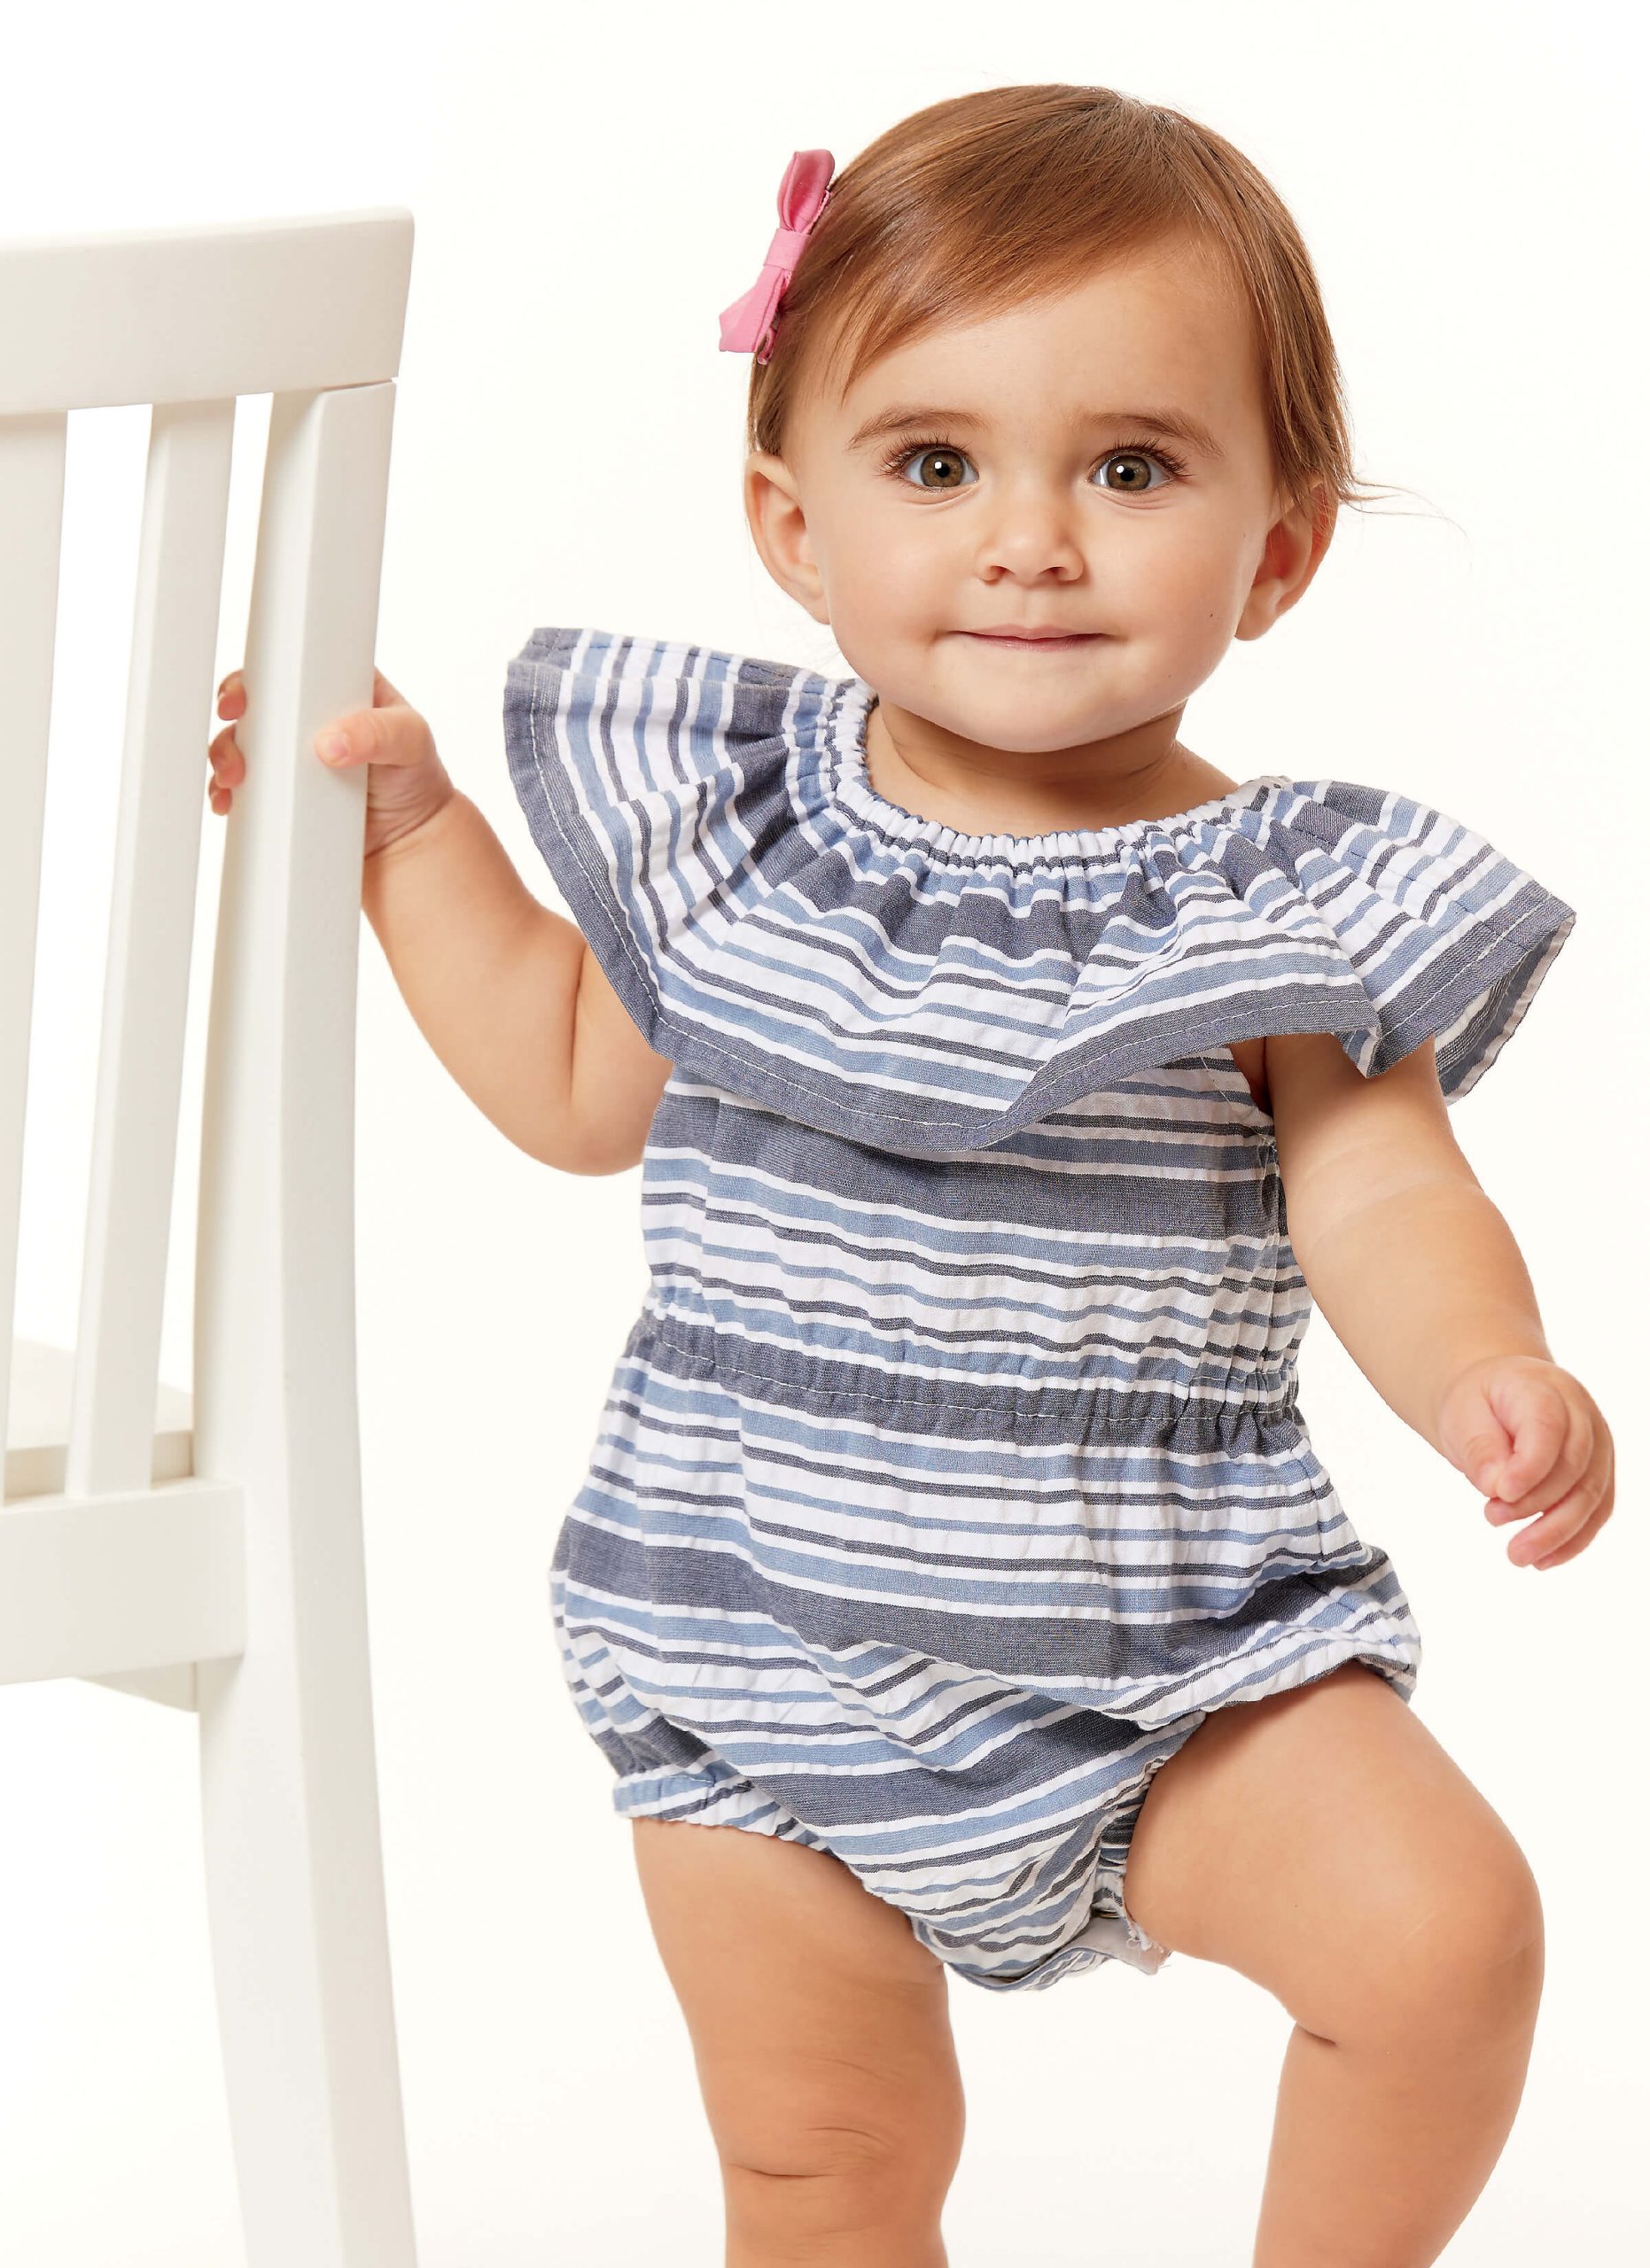 Butterick Sewing Pattern B6549 Infants Romper, Dress and Panties